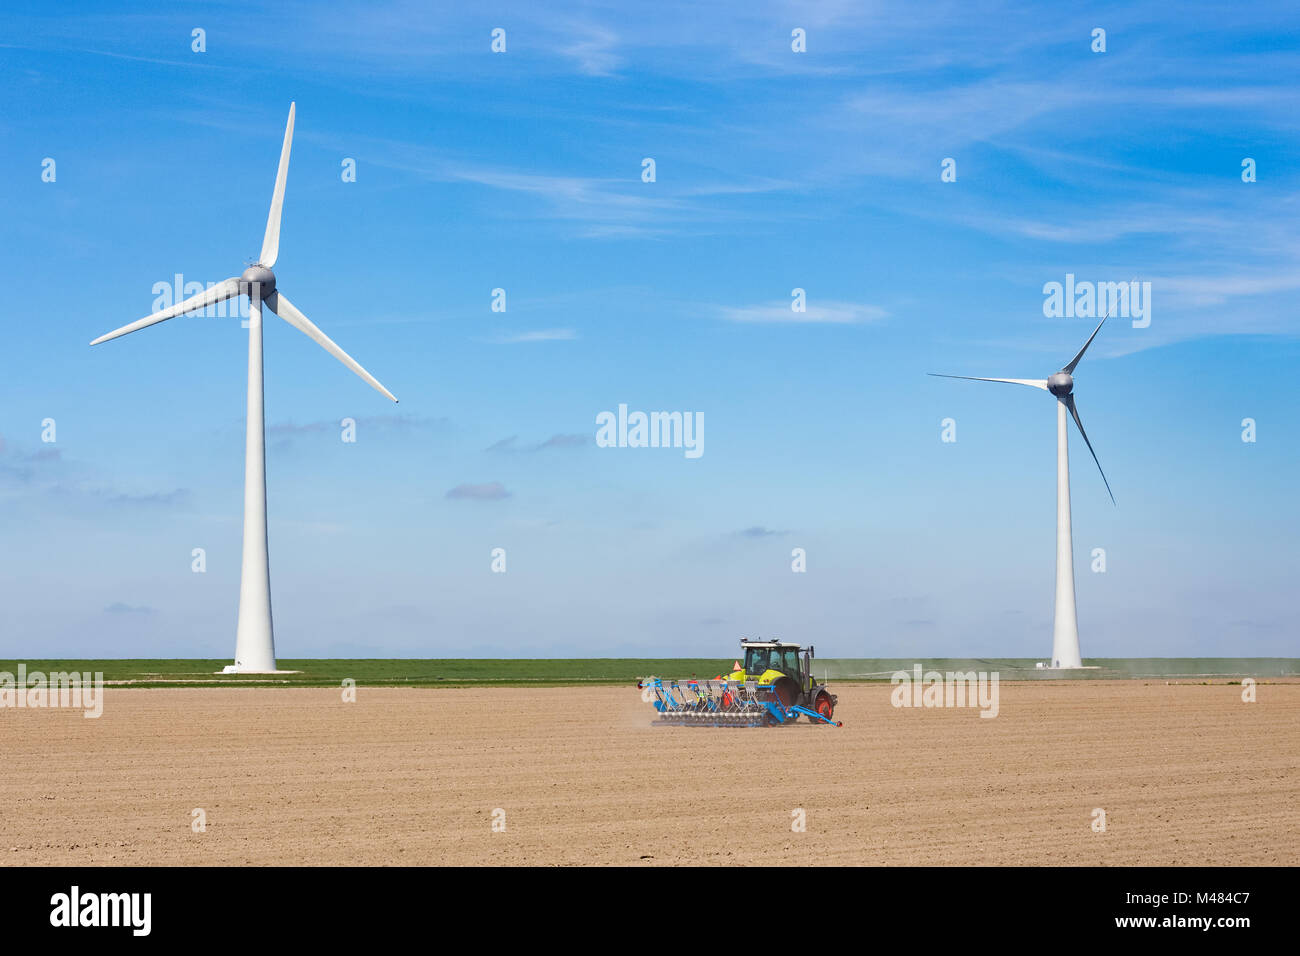 Farmer on tractor sowing in soil near dike and windmills Stock Photo